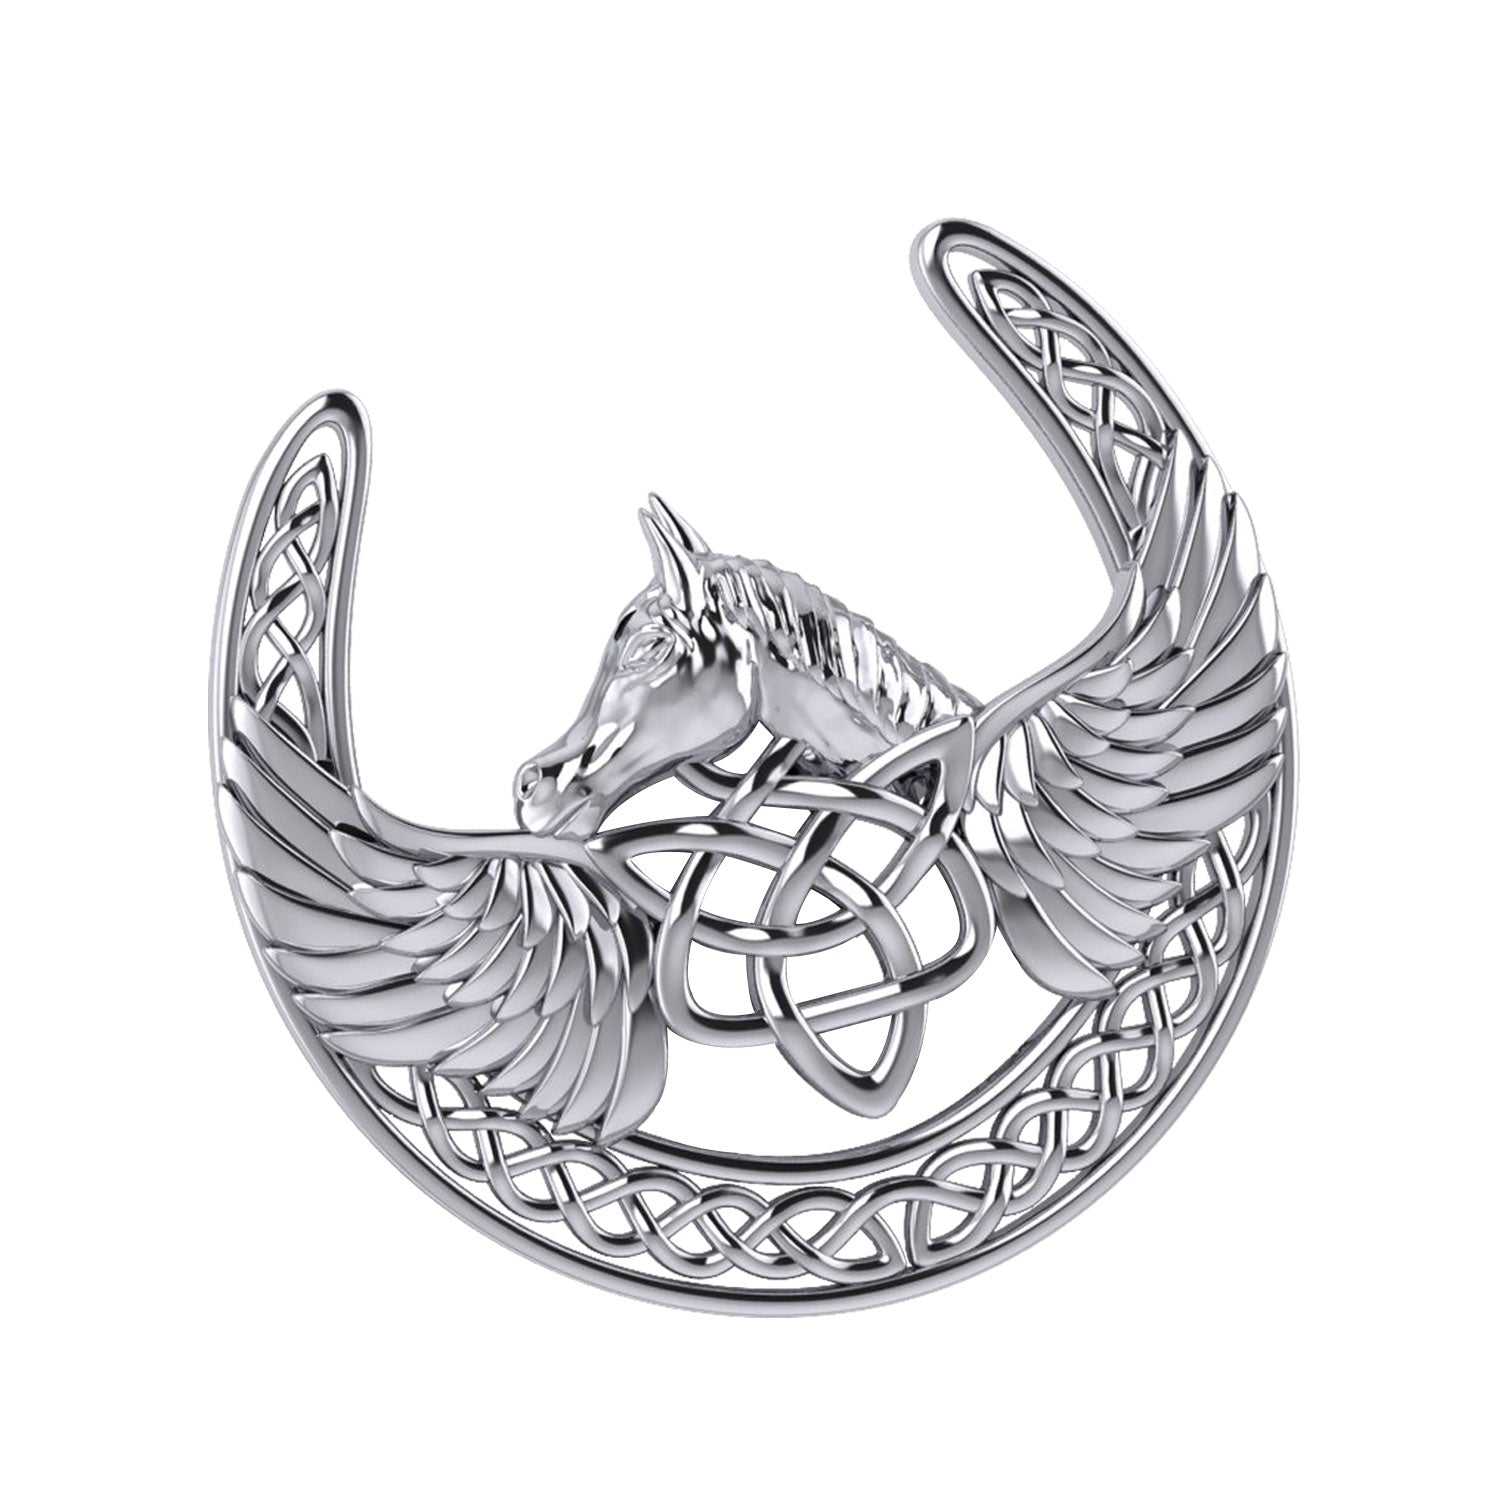 Sterling Silver Celtic Guardian Pegasus Brooch with Angel Wings - Spiritual Protection Jewelry by Peter Stone TBC166